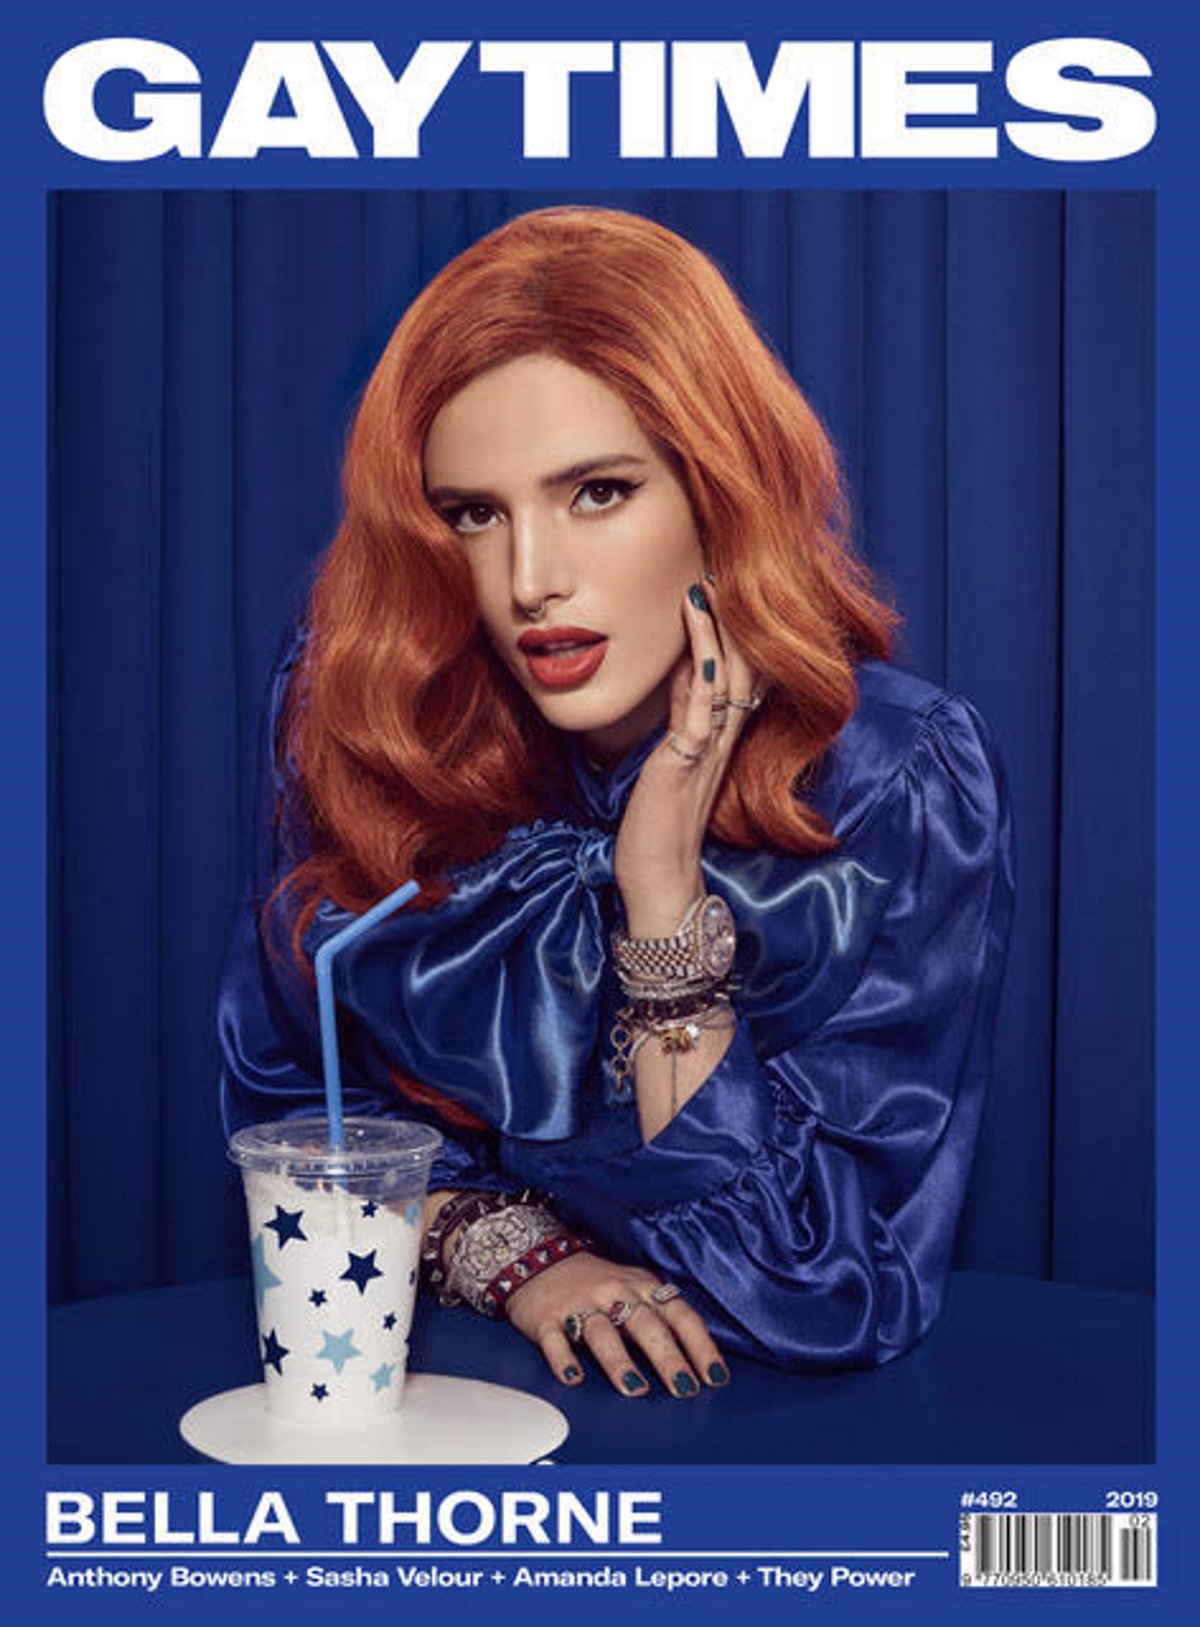 Bella Thorne Lesbian - Bella Thorne reveals she's 'actually pansexual' | PinkNews